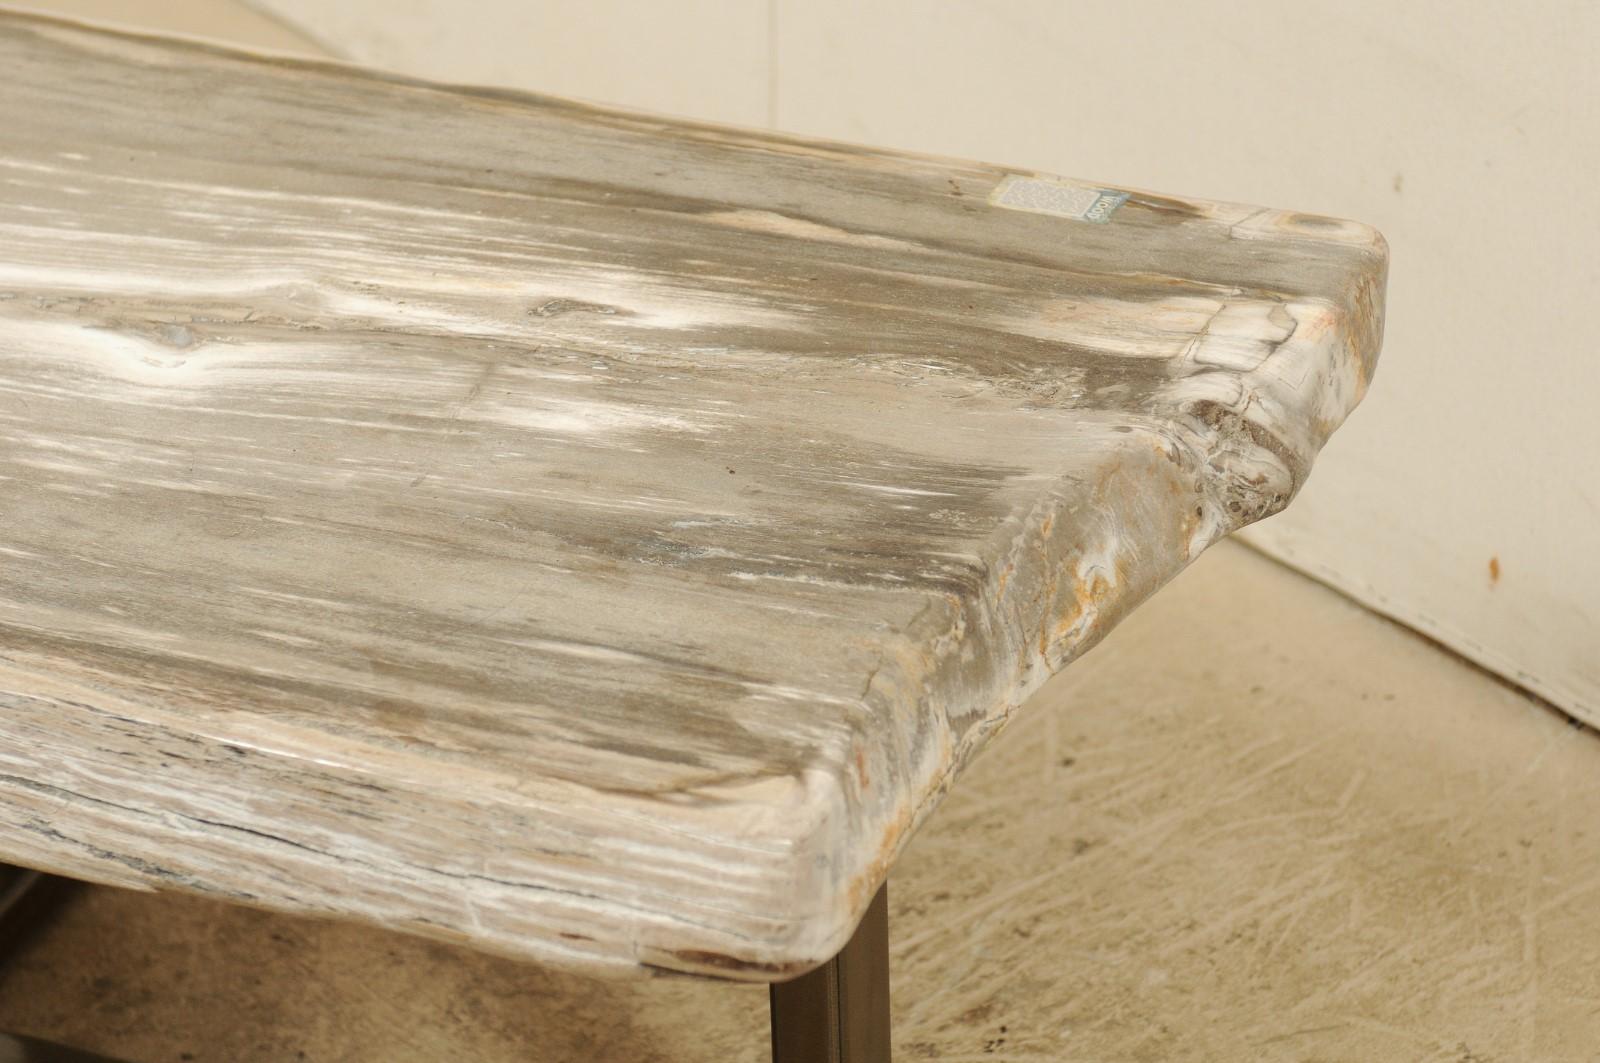 Iron Petrified Wood Slab Bench or Coffee Table with Modern Base